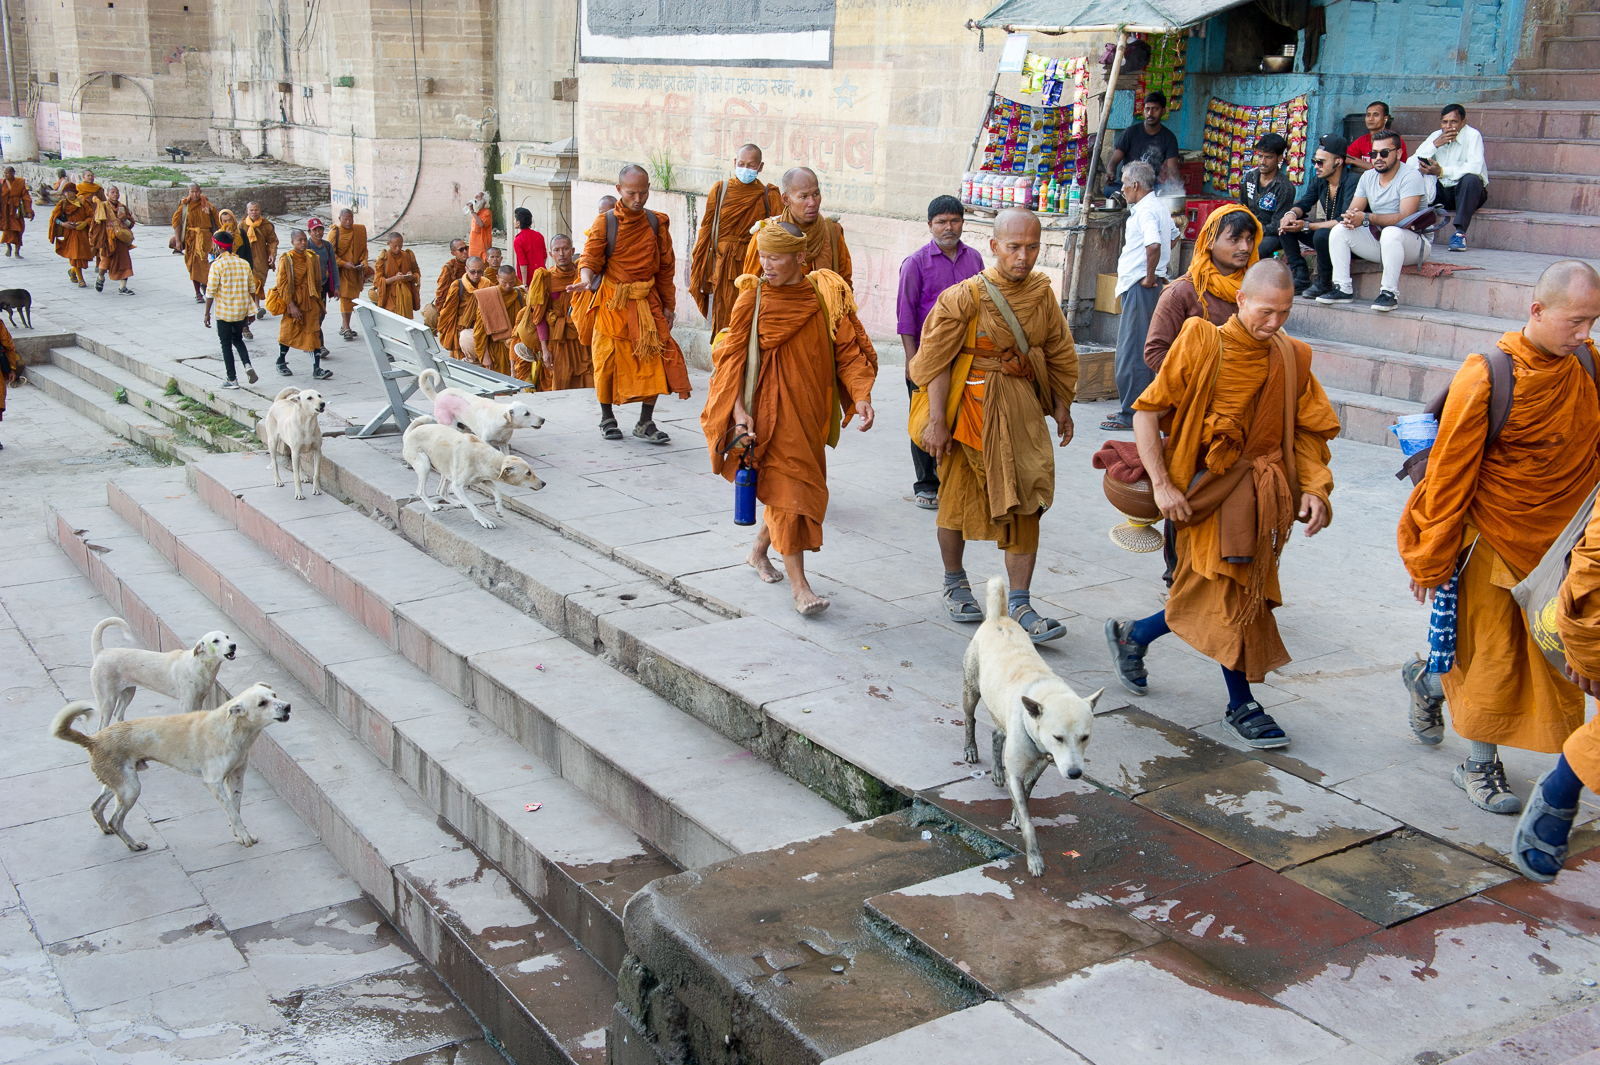  Buddhist monks being chased by dogs on the ghats, Varanasi, 2019 